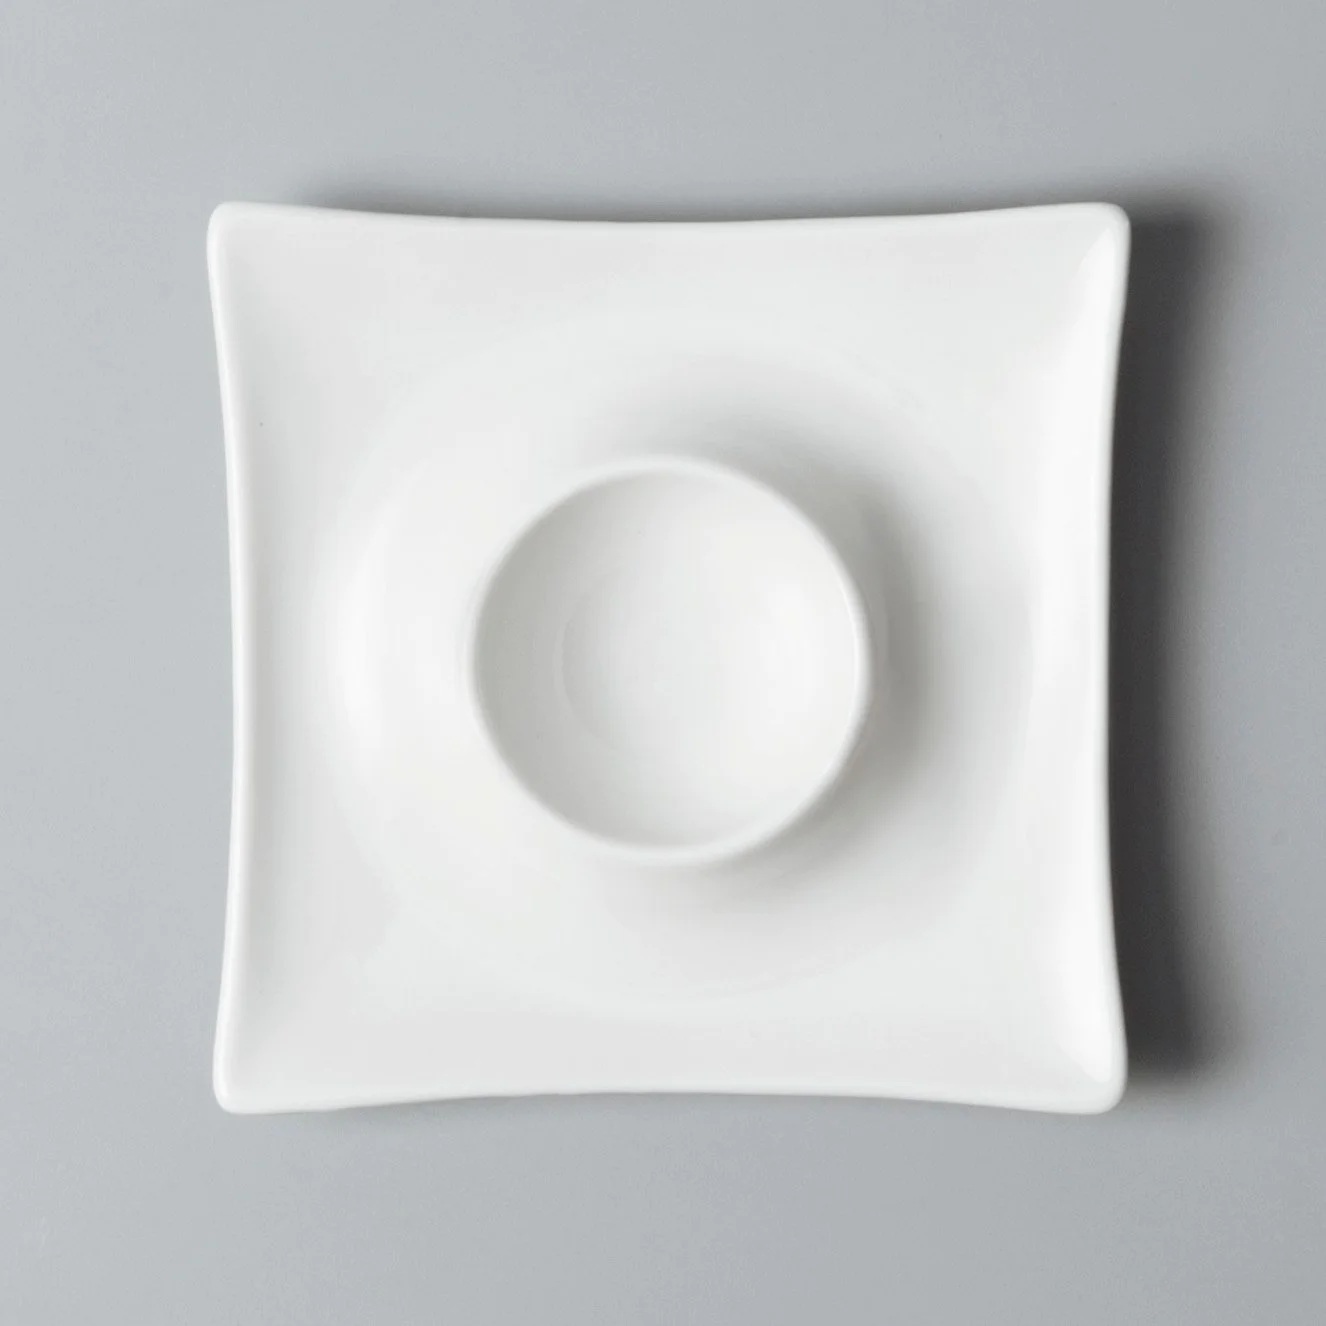 Two Eight casual off white porcelain dinnerware customized for hotel